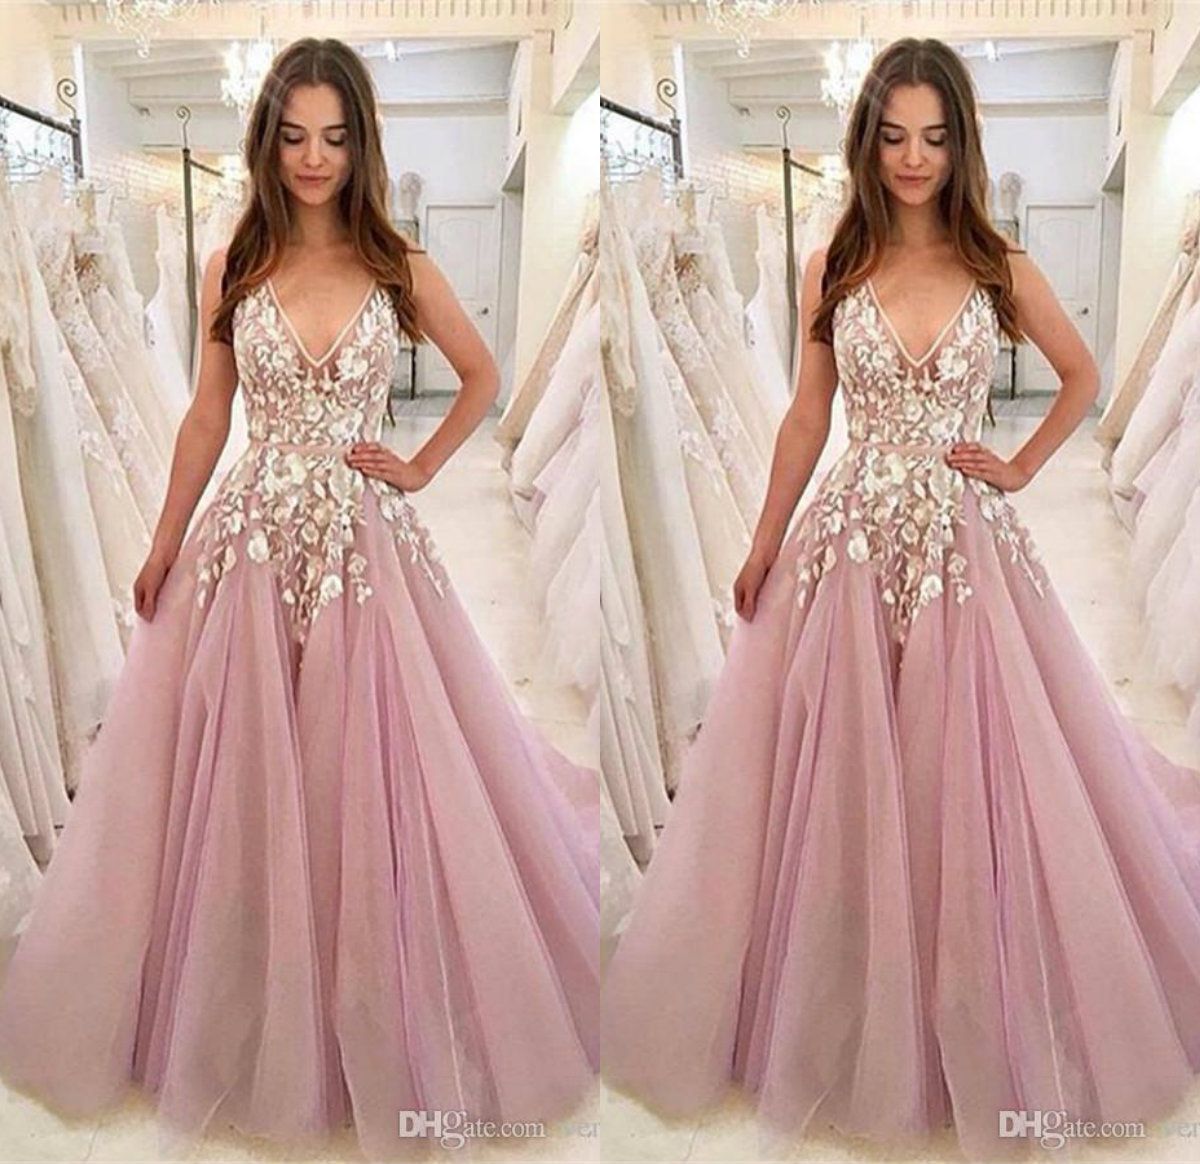 middle school prom dresses 2019